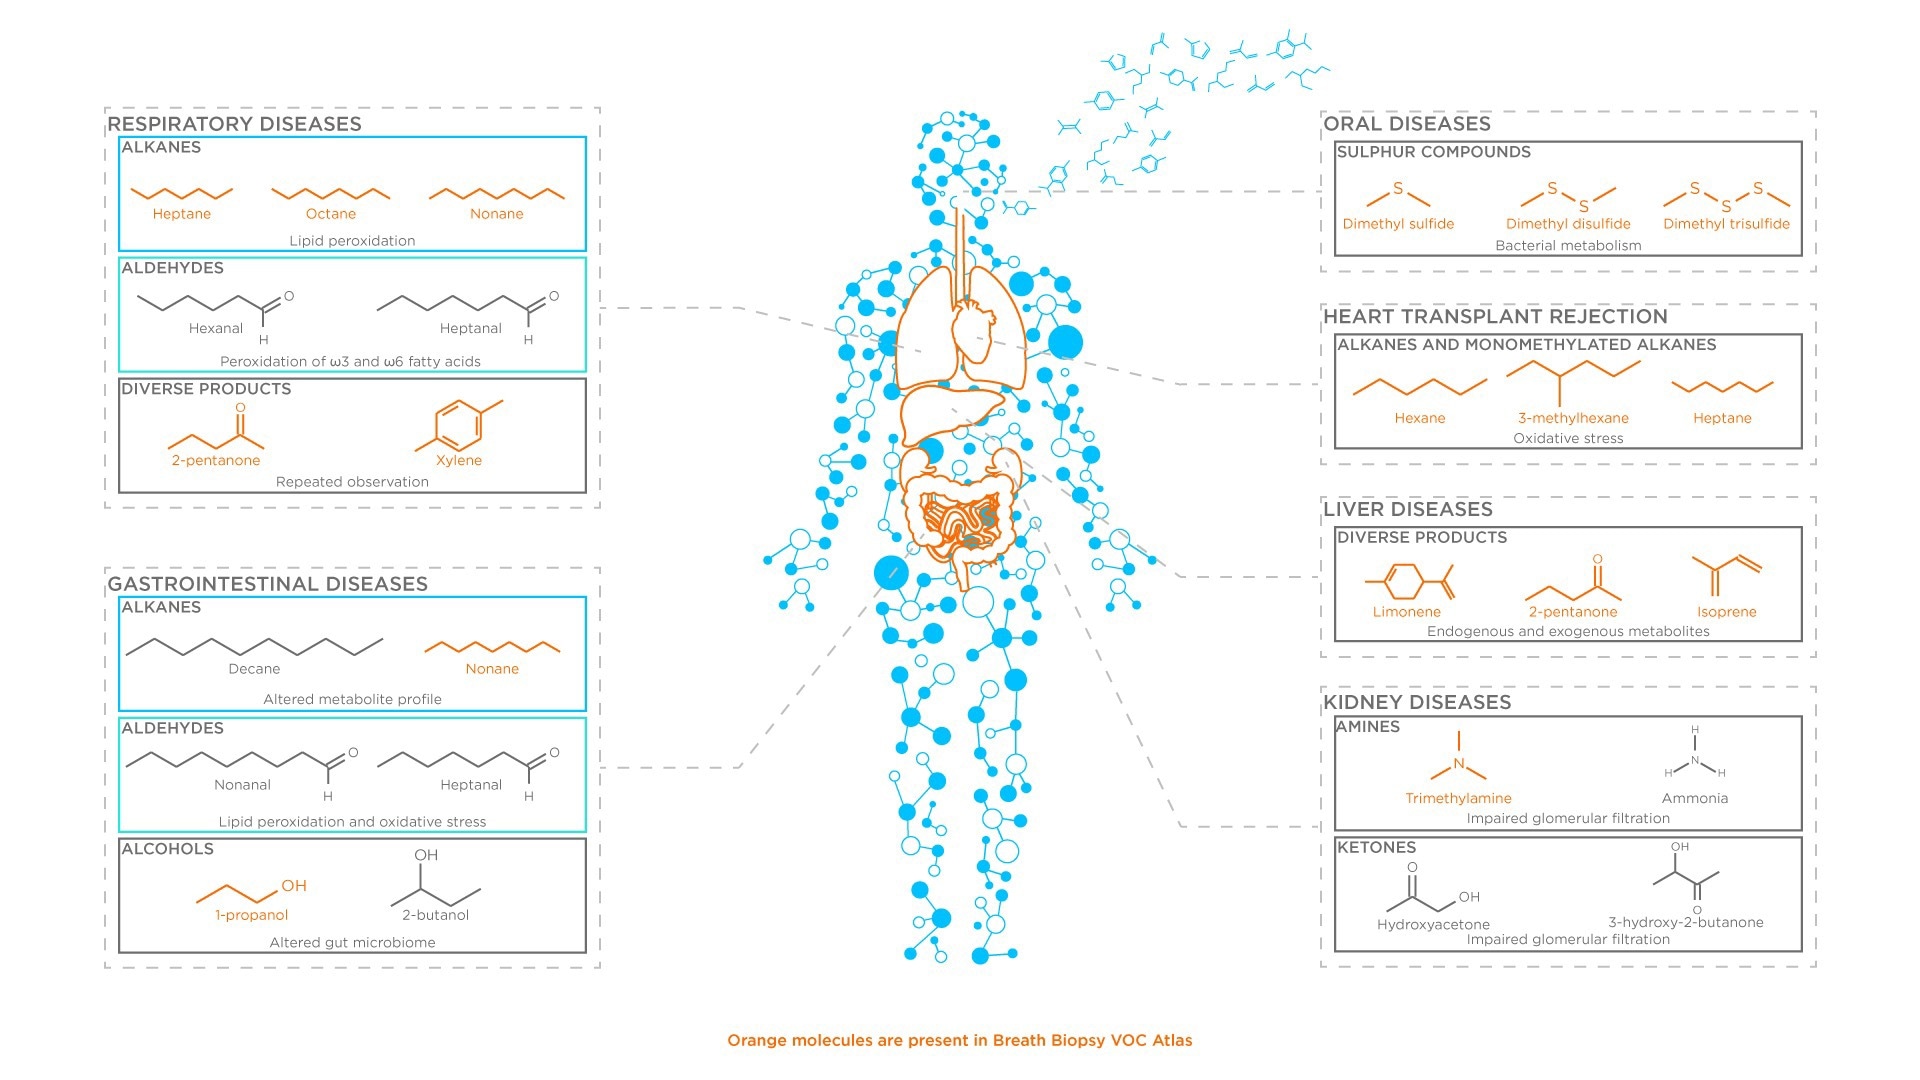 Examples of how different inflammation processes and resulting small molecule biomarkers have been prospectively connected to different illnesses in a disease-specific manner.